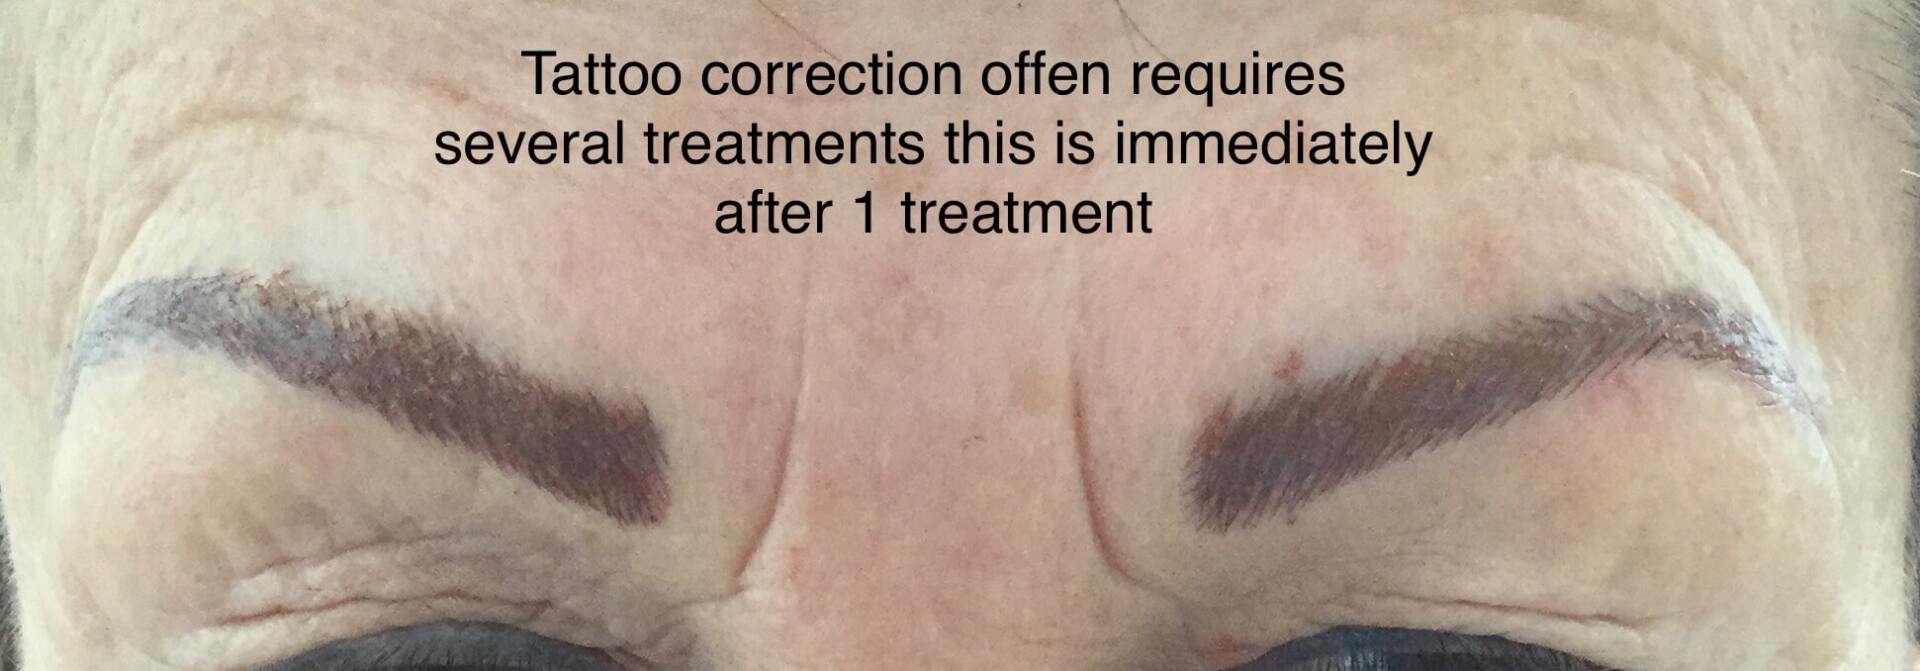 Eyebrow Tattoo Correction On Client - Treatment 1 — Cosmetic Tattooing in Bundaberg, QLD